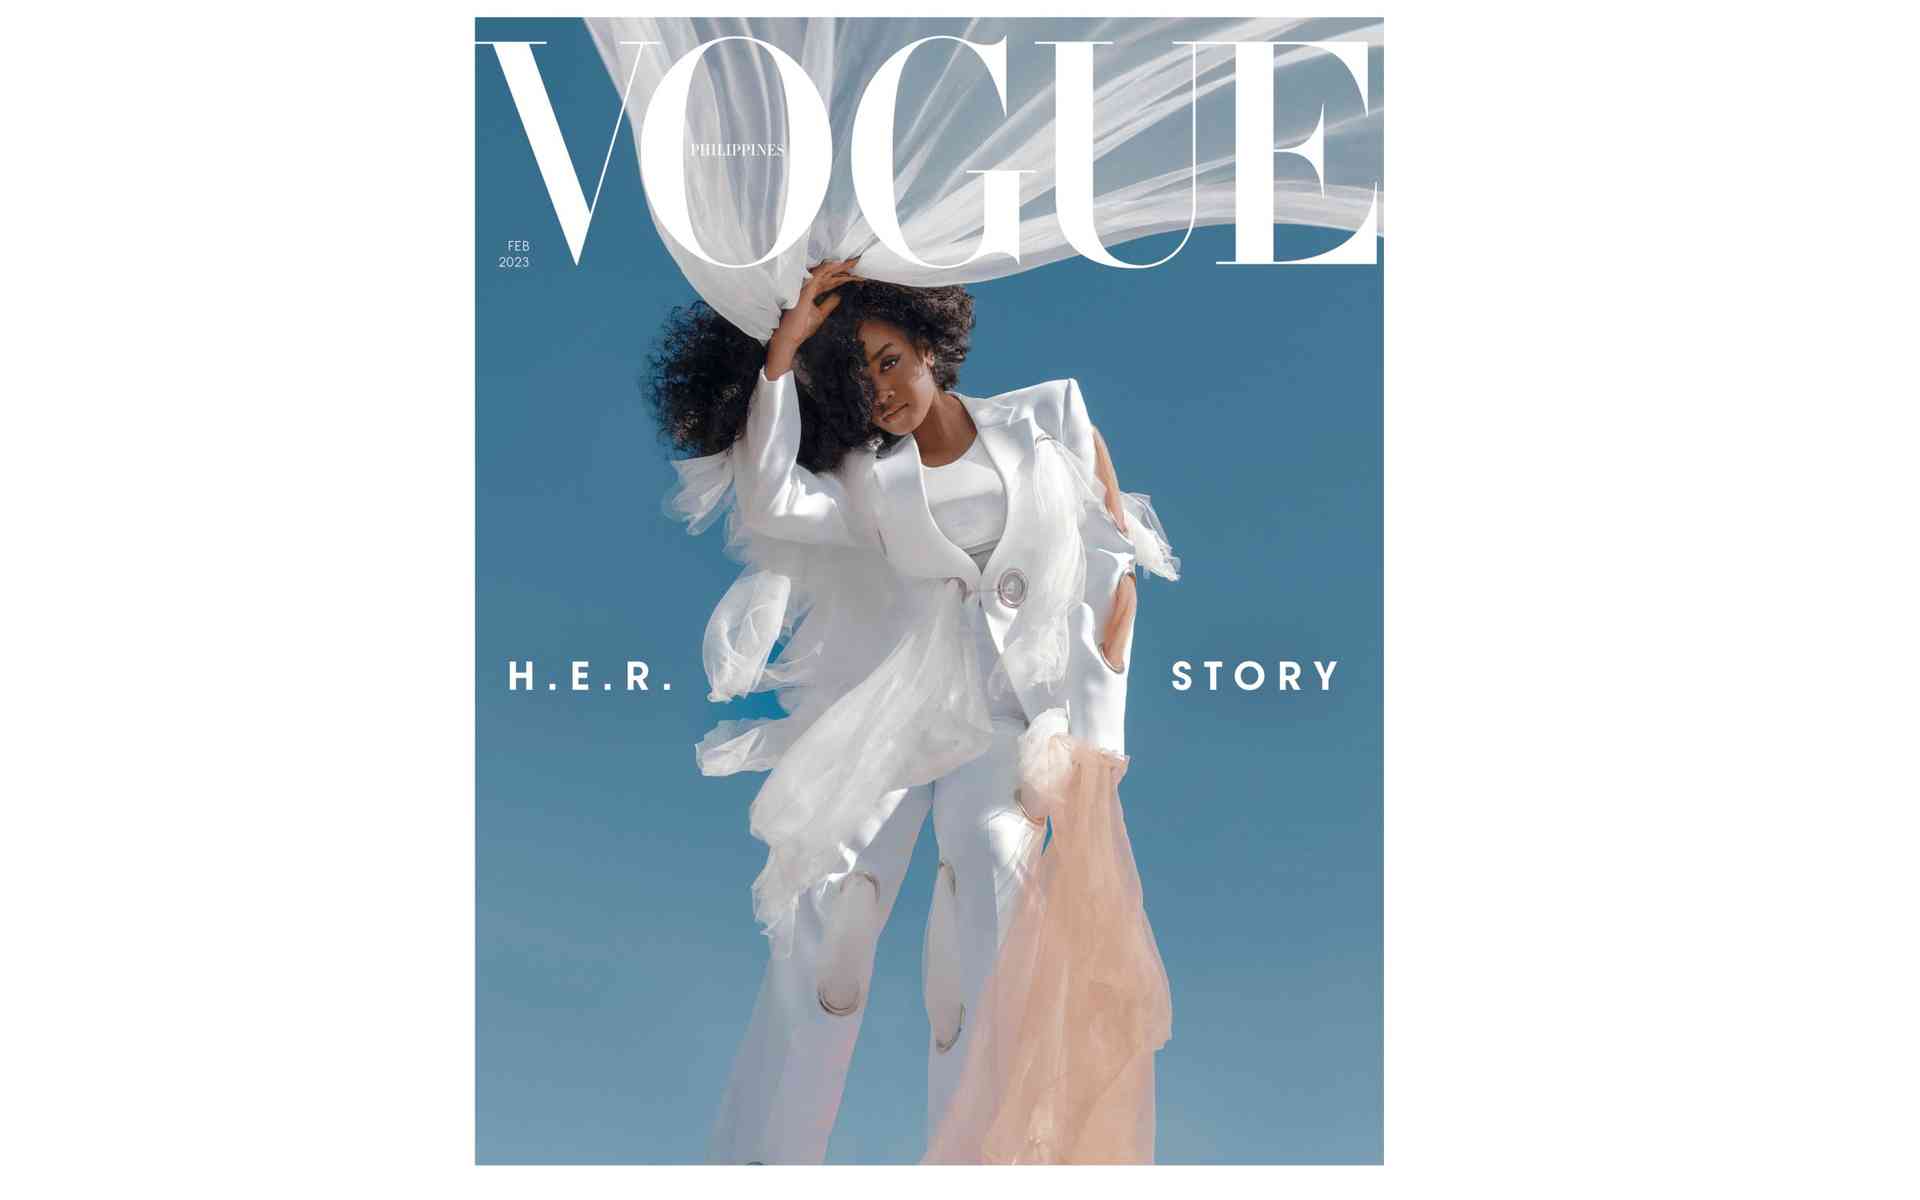 LOOK: H.E.R is Vogue PH's February cover star!